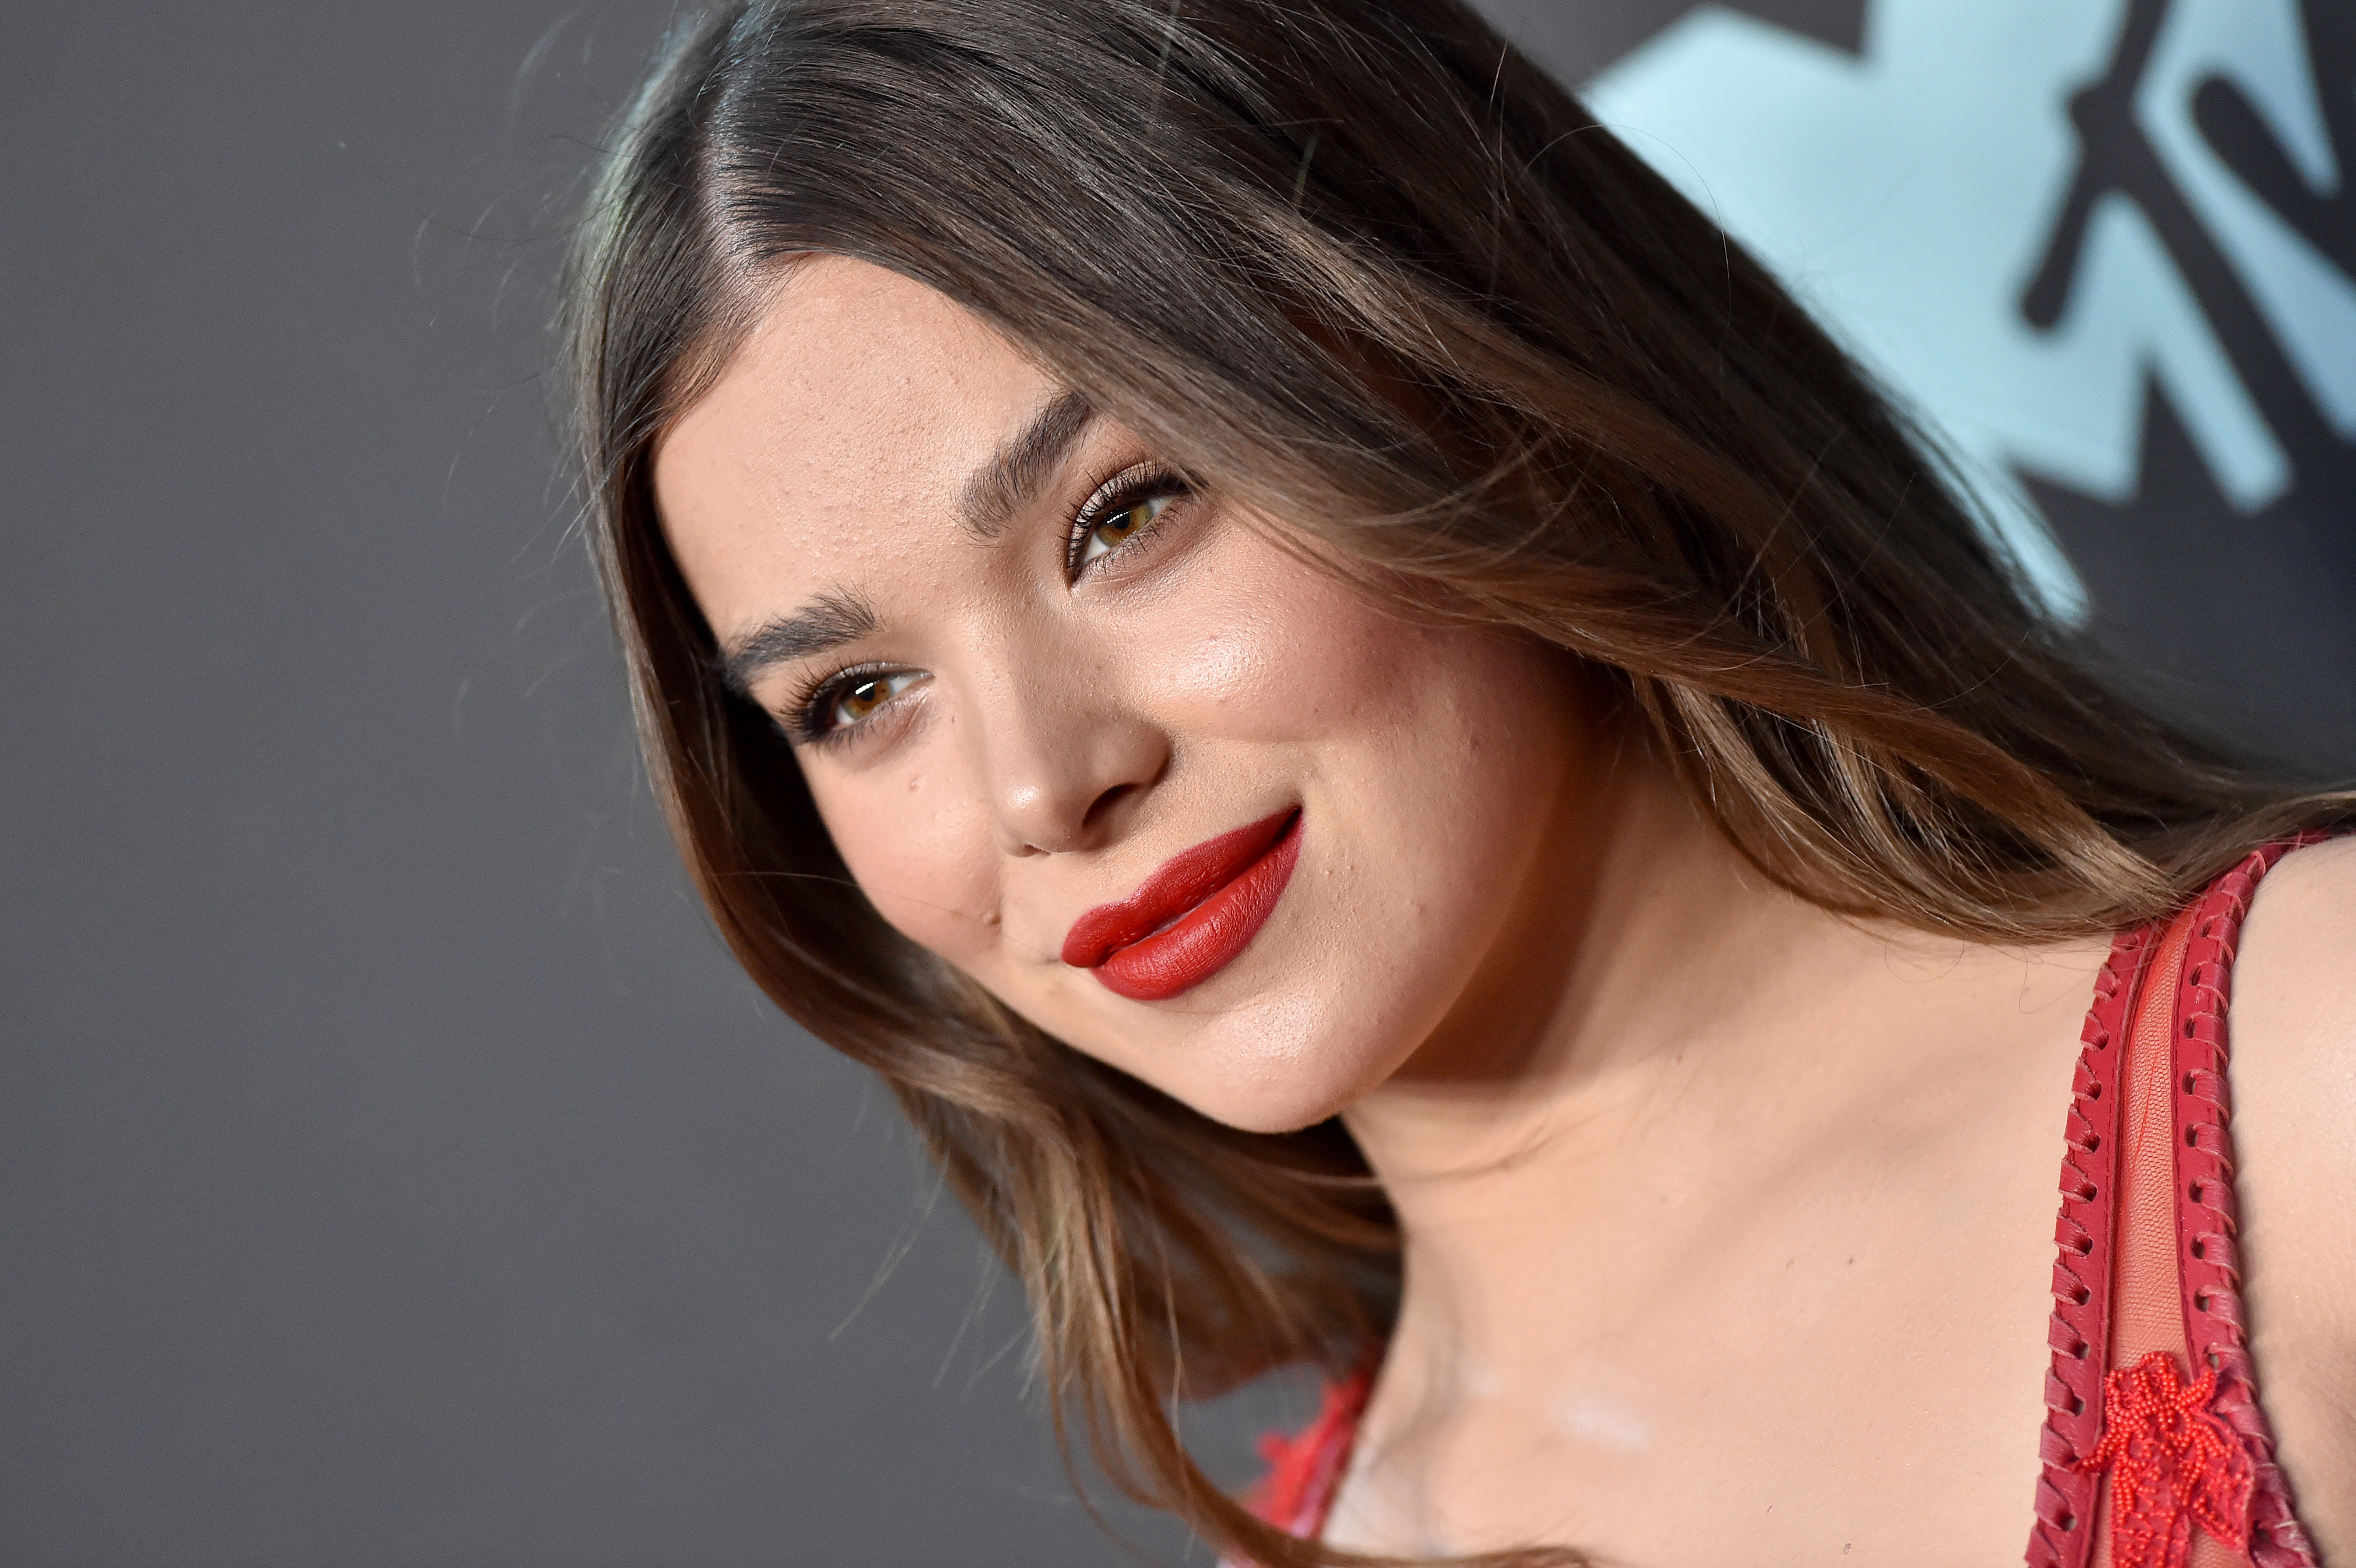 'Hawkeye' actor Hailee Steinfeld, who stars alongside Florence Pugh in the Marvel Disney+ series, wears a red dress with thin straps and red lipstick.